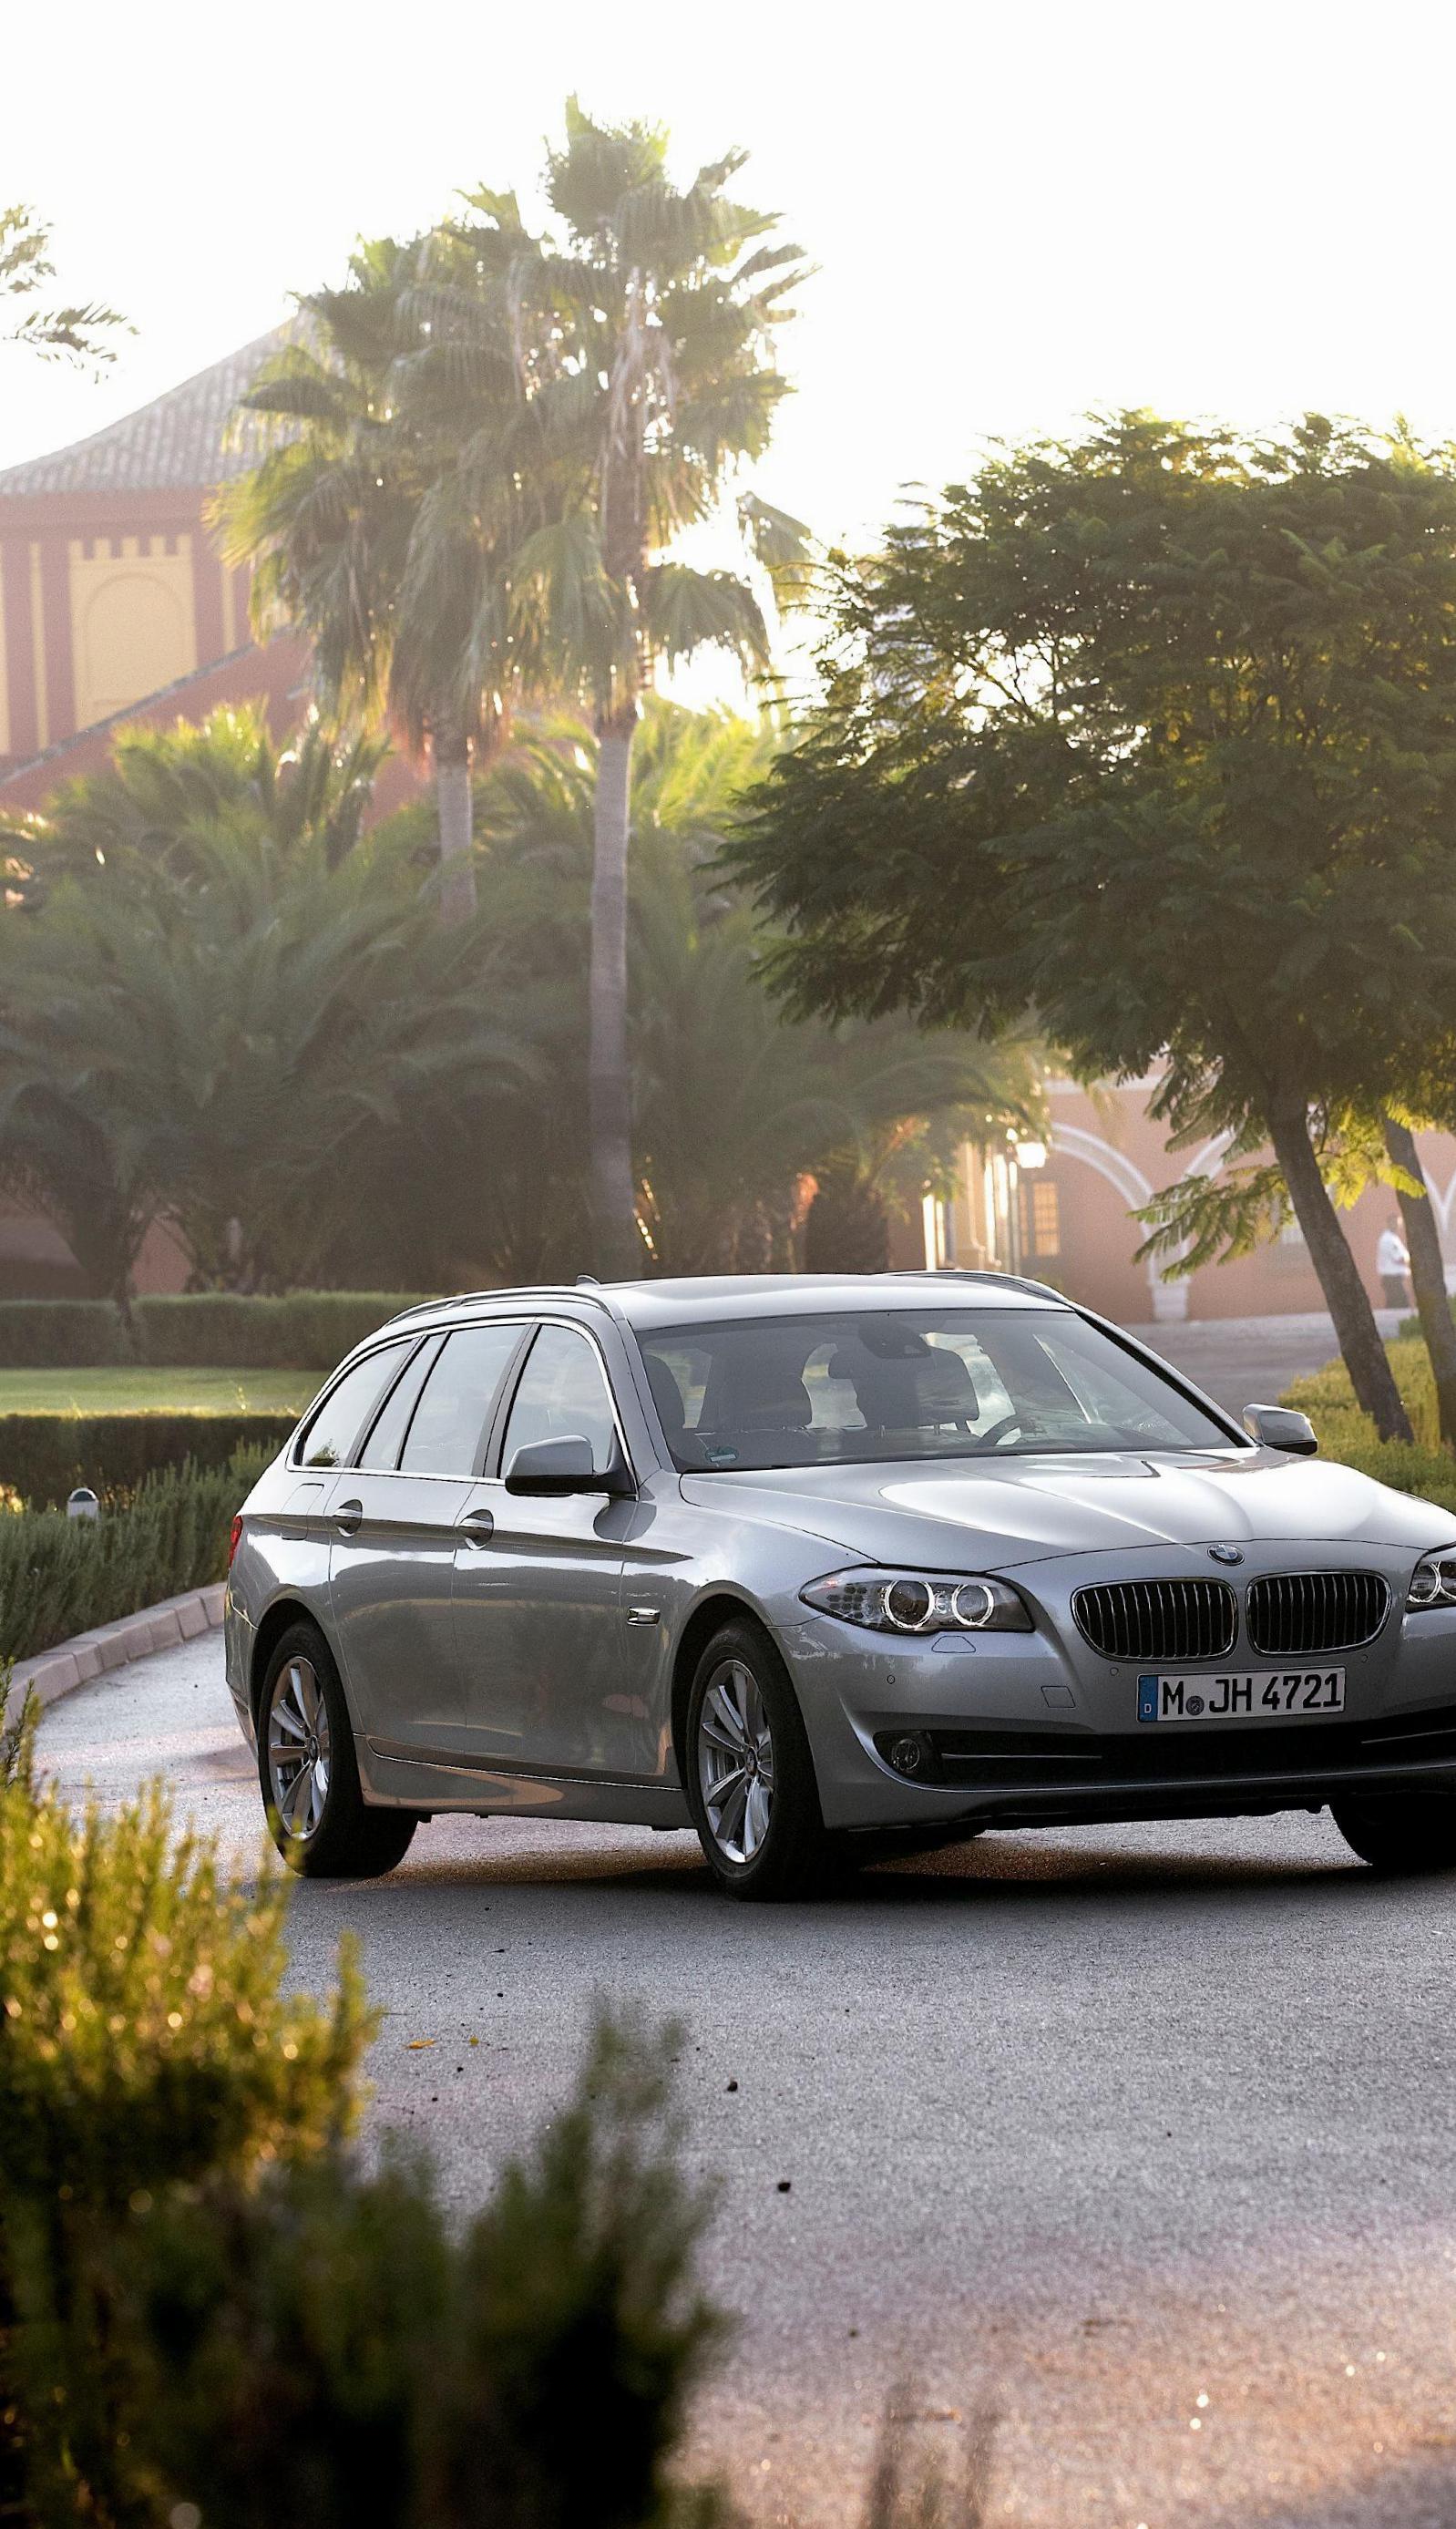 BMW 5 Series Touring (F11) cost hatchback